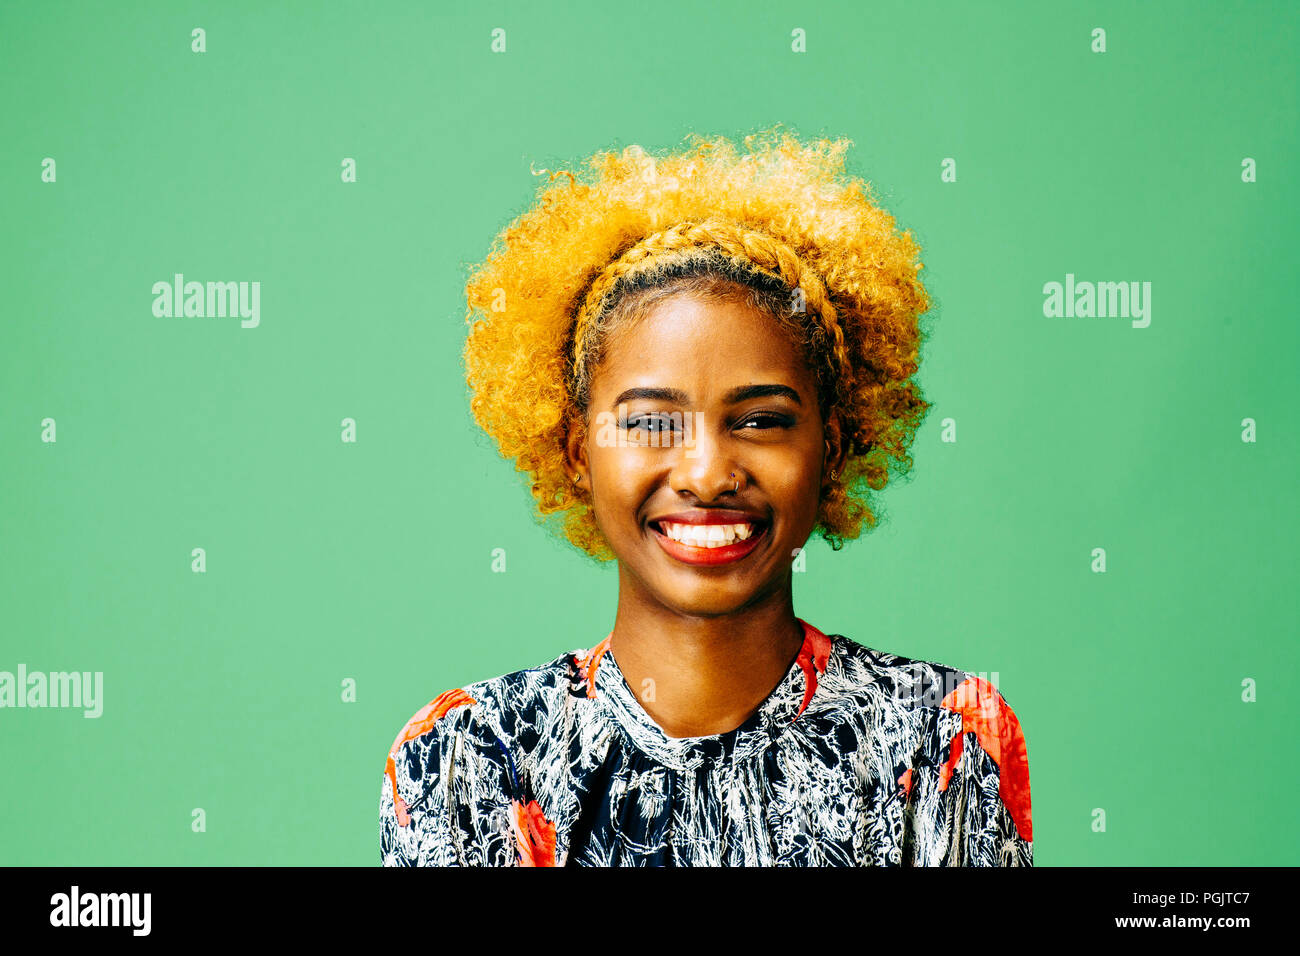 A very happy young girl with big smile, in front of a green background Stock Photo